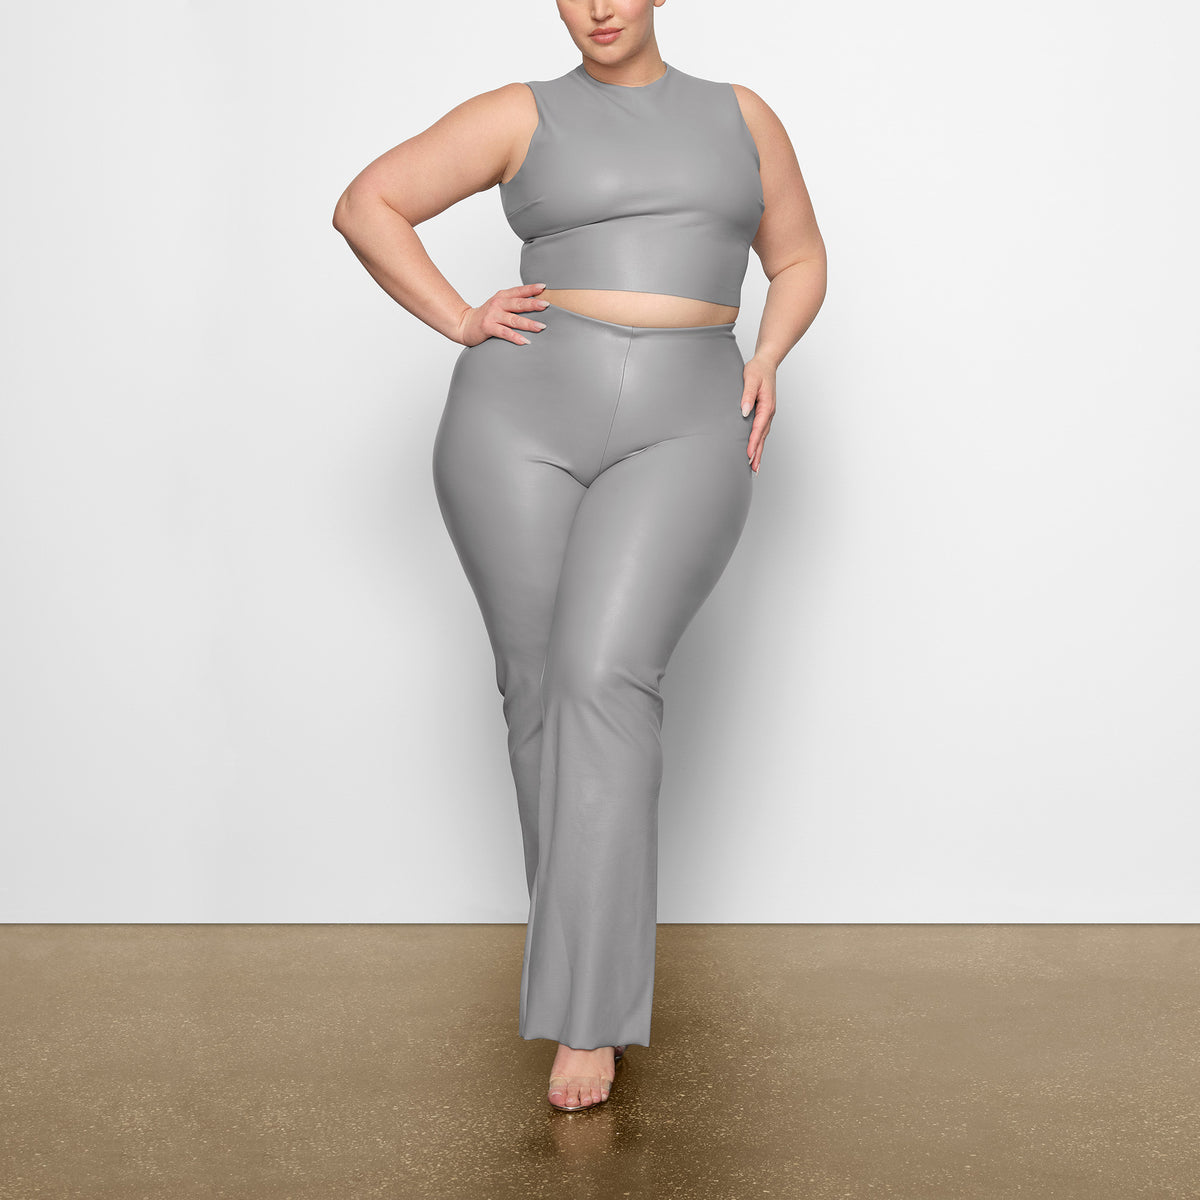 Kim Kardashian's Skims drops faux leather collection featuring